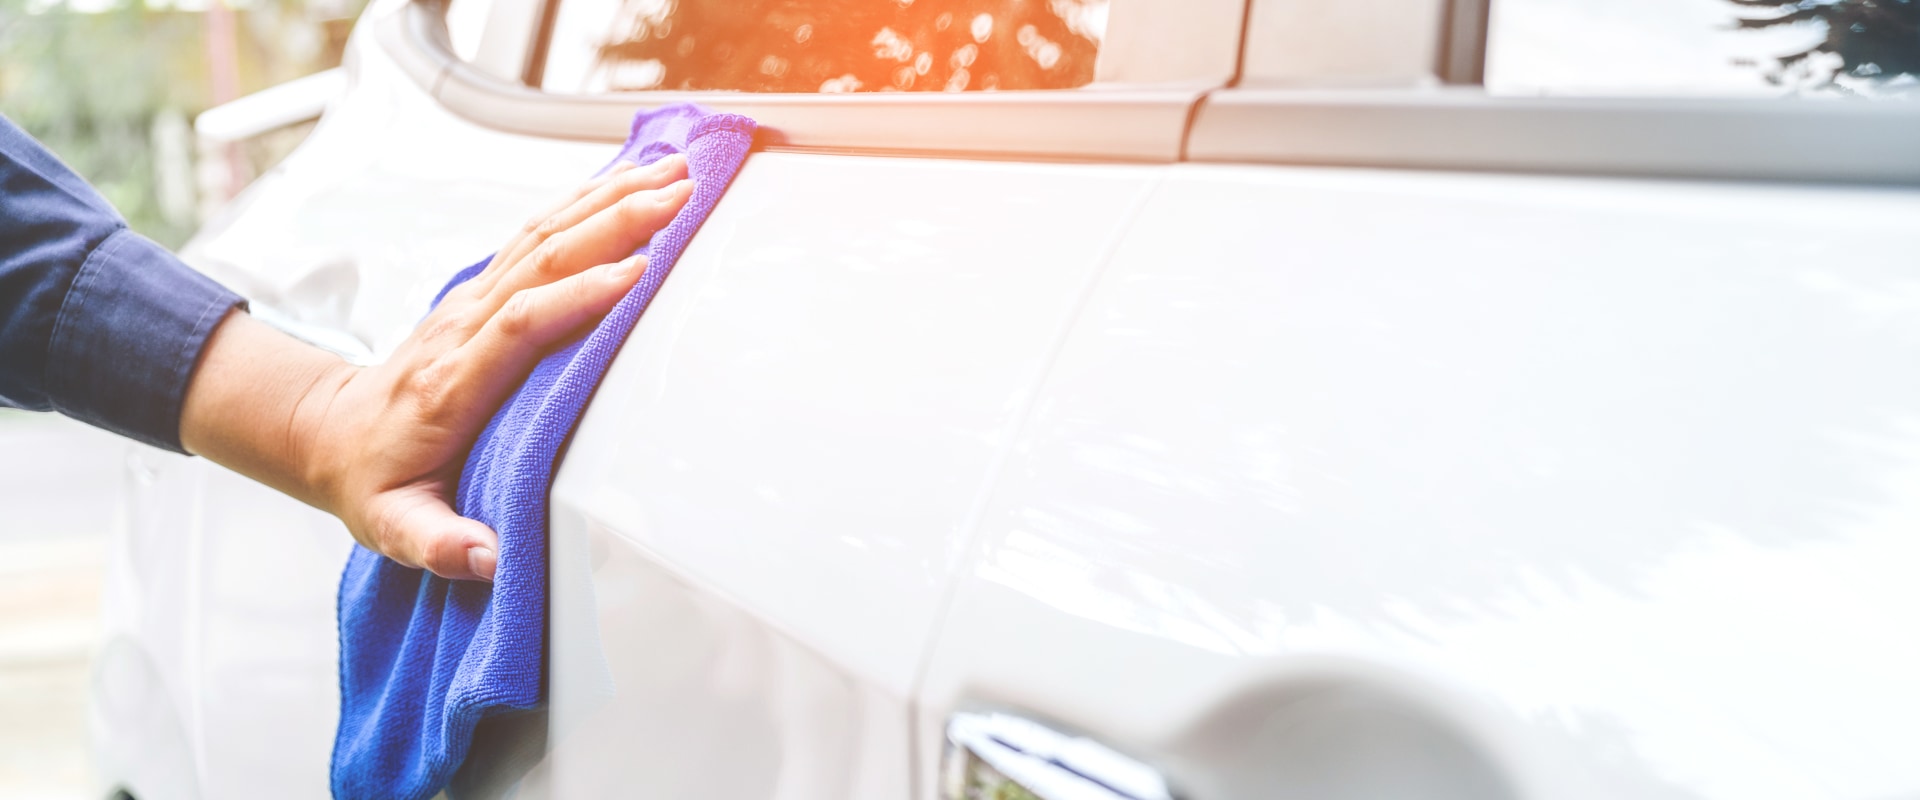 Are car washes a good investment?